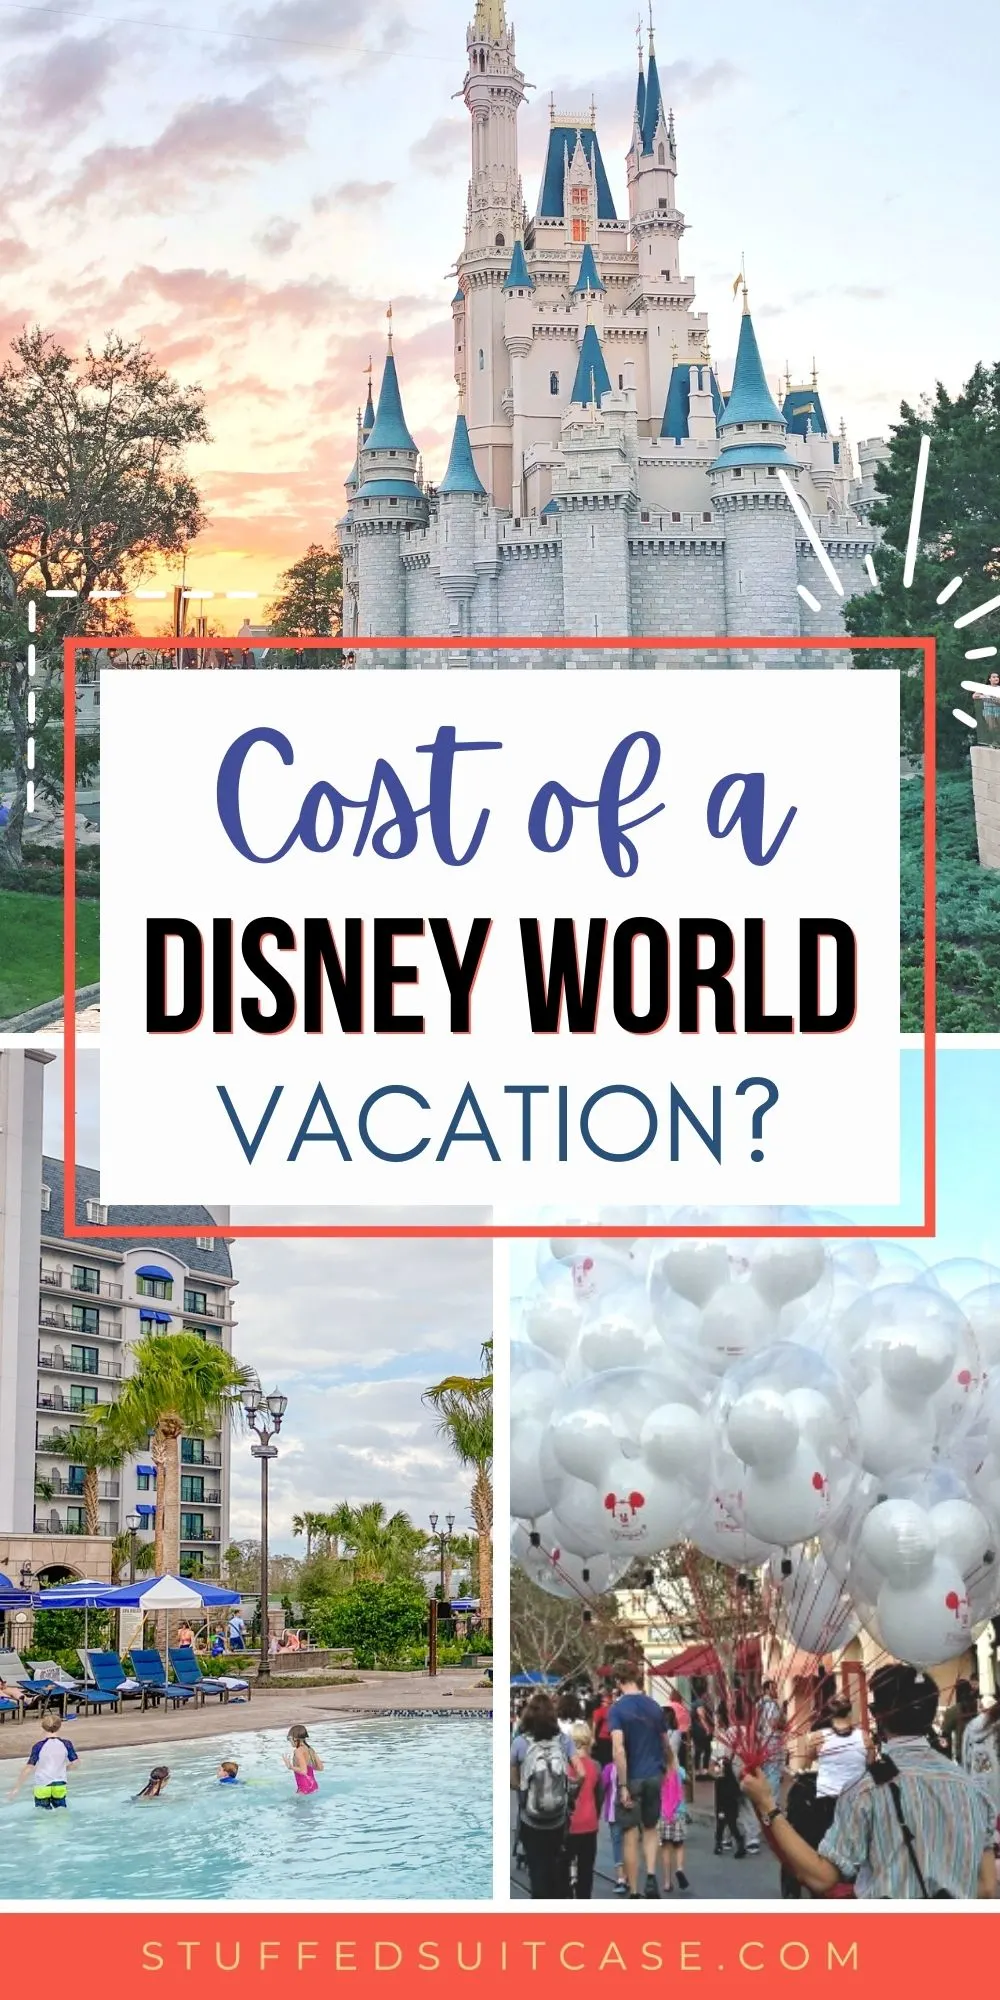 How Much Does It Cost To Go to Disney World? [Budget Worksheet]